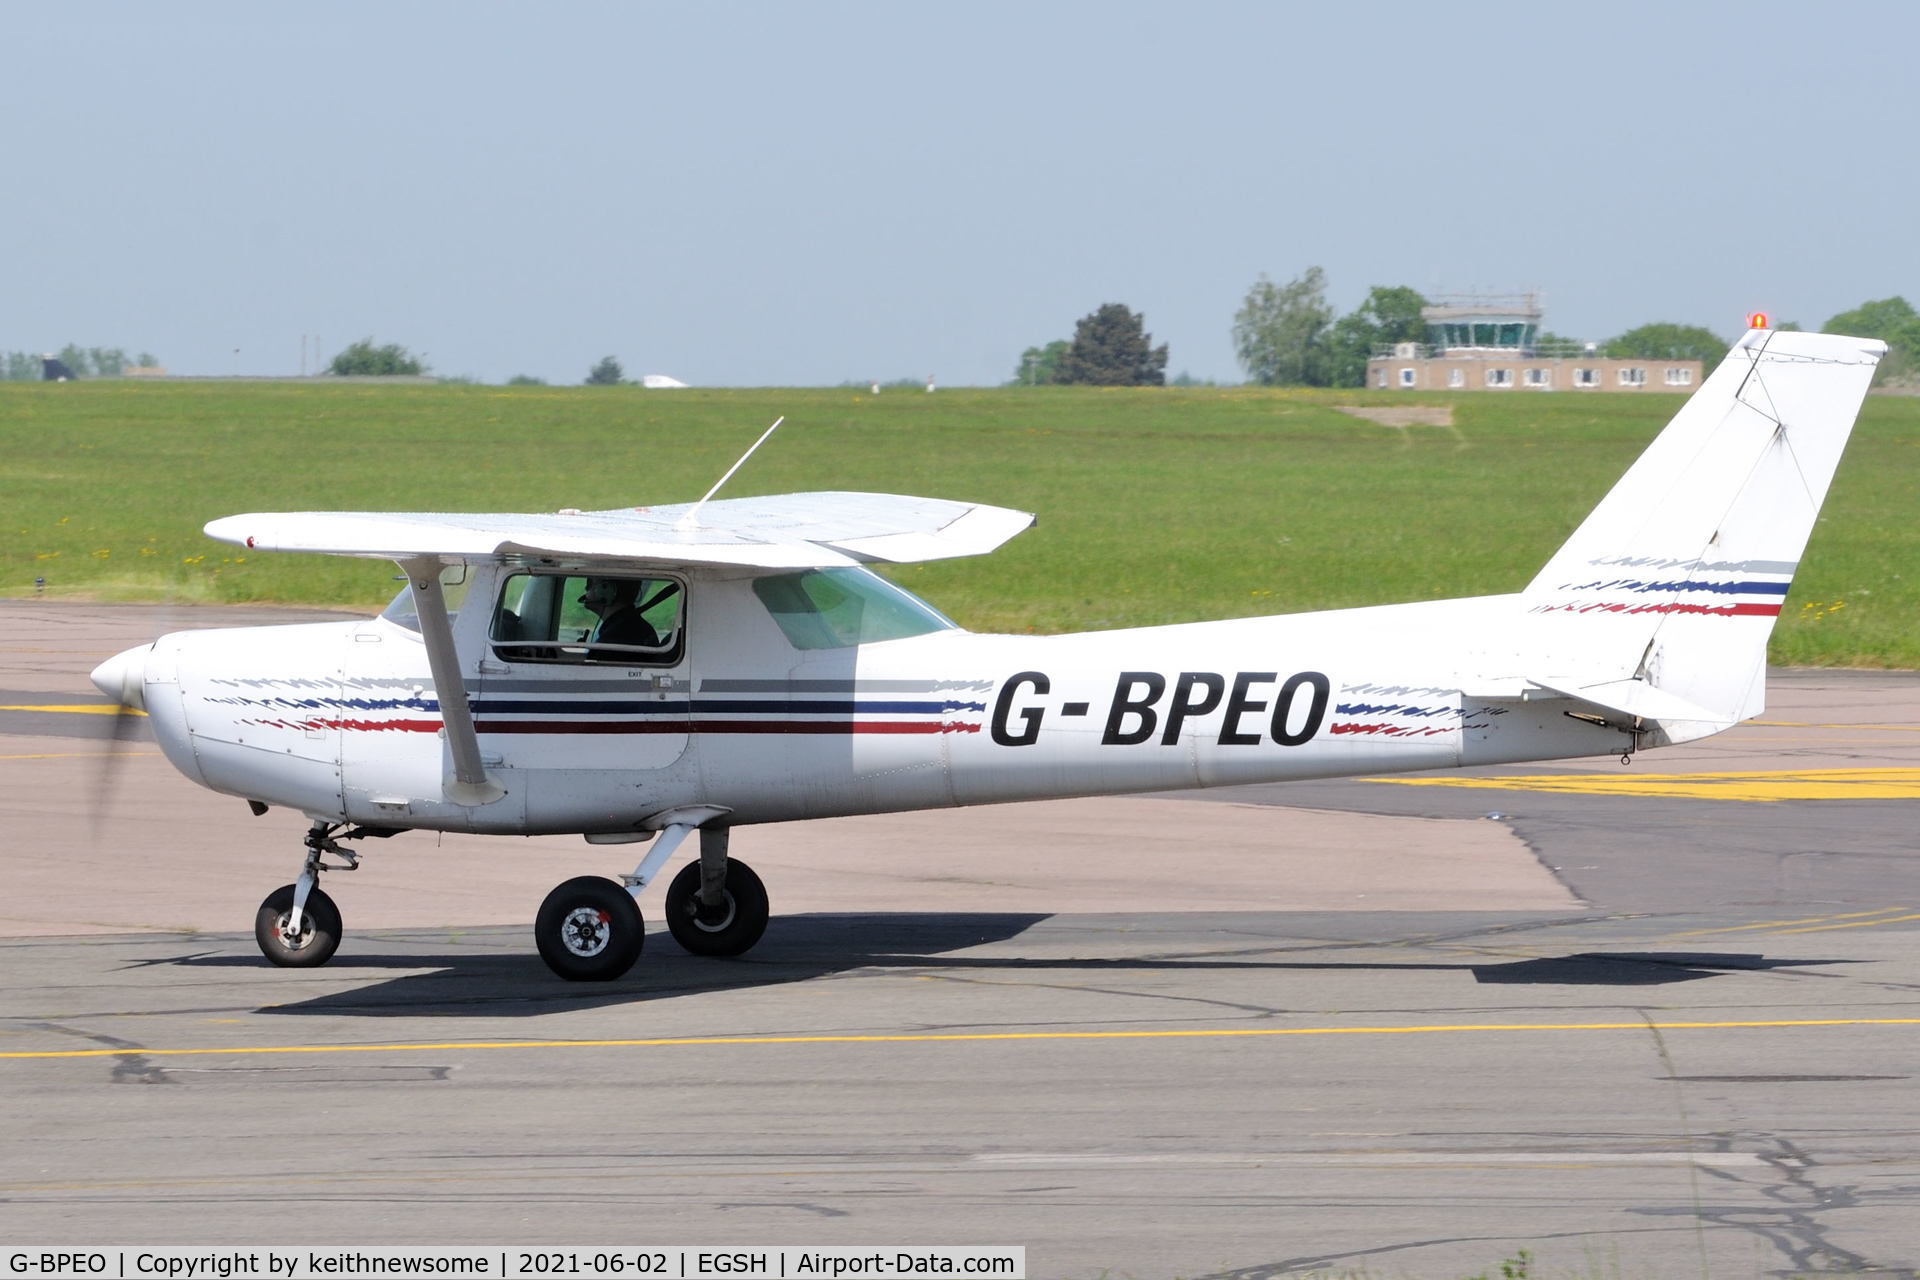 G-BPEO, 1980 Cessna 152 C/N 152-83775, Arriving at Norwich.